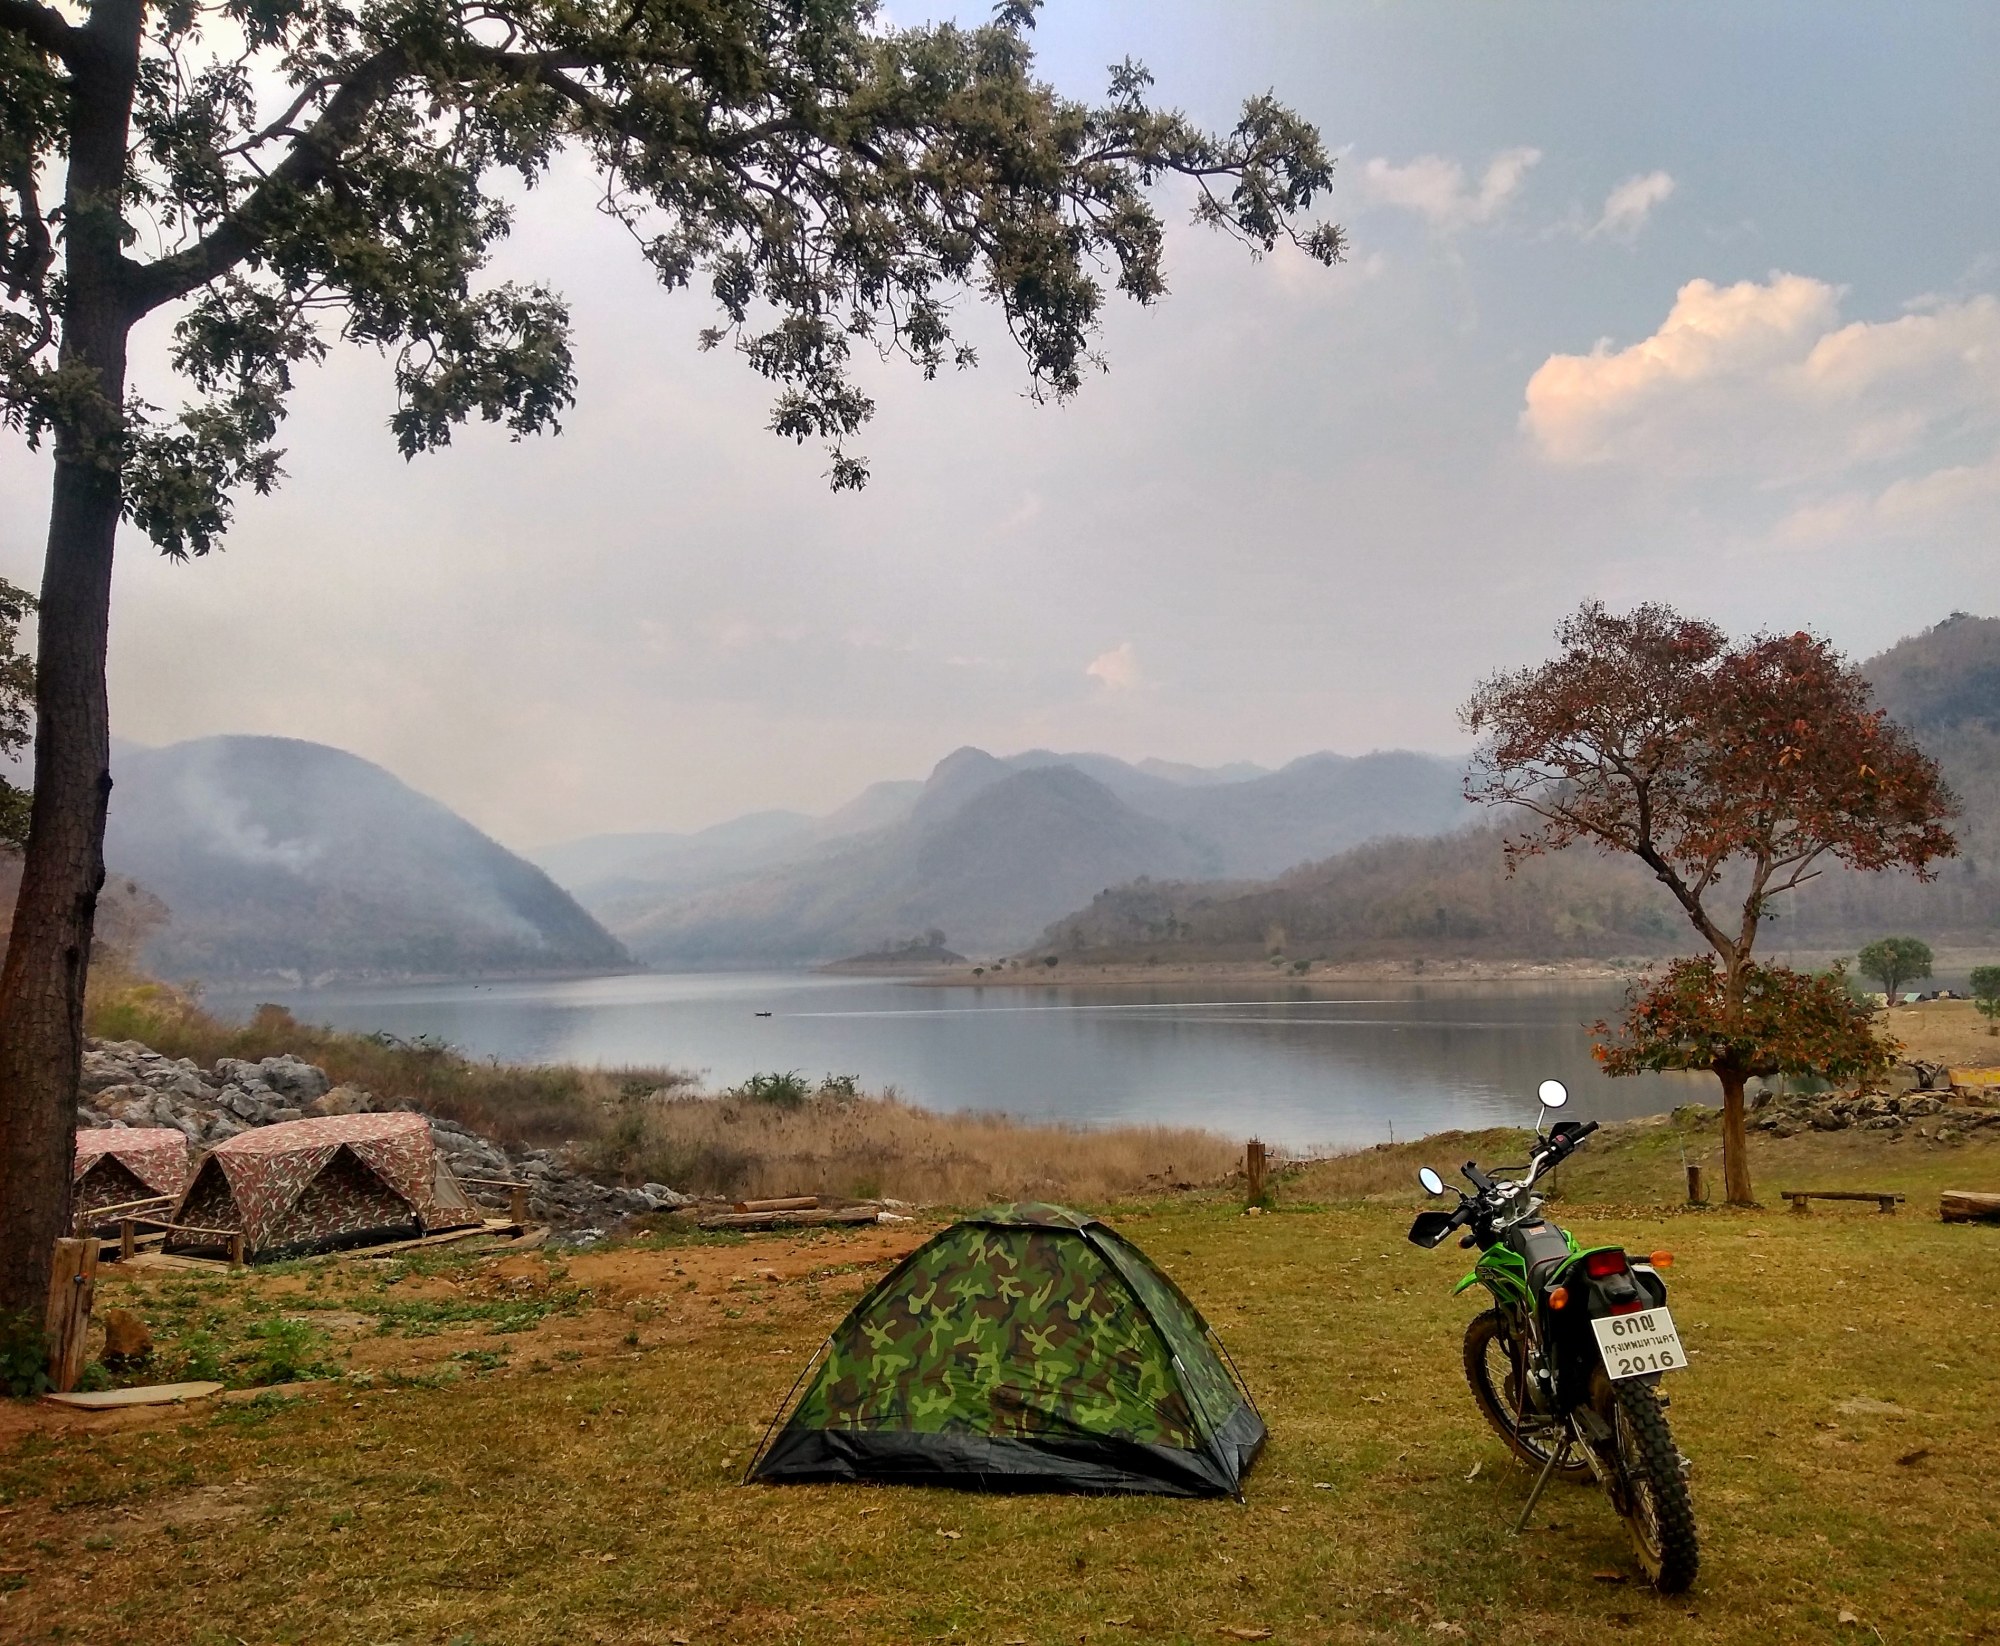 Camping in Mae Ping National Park, Thailand